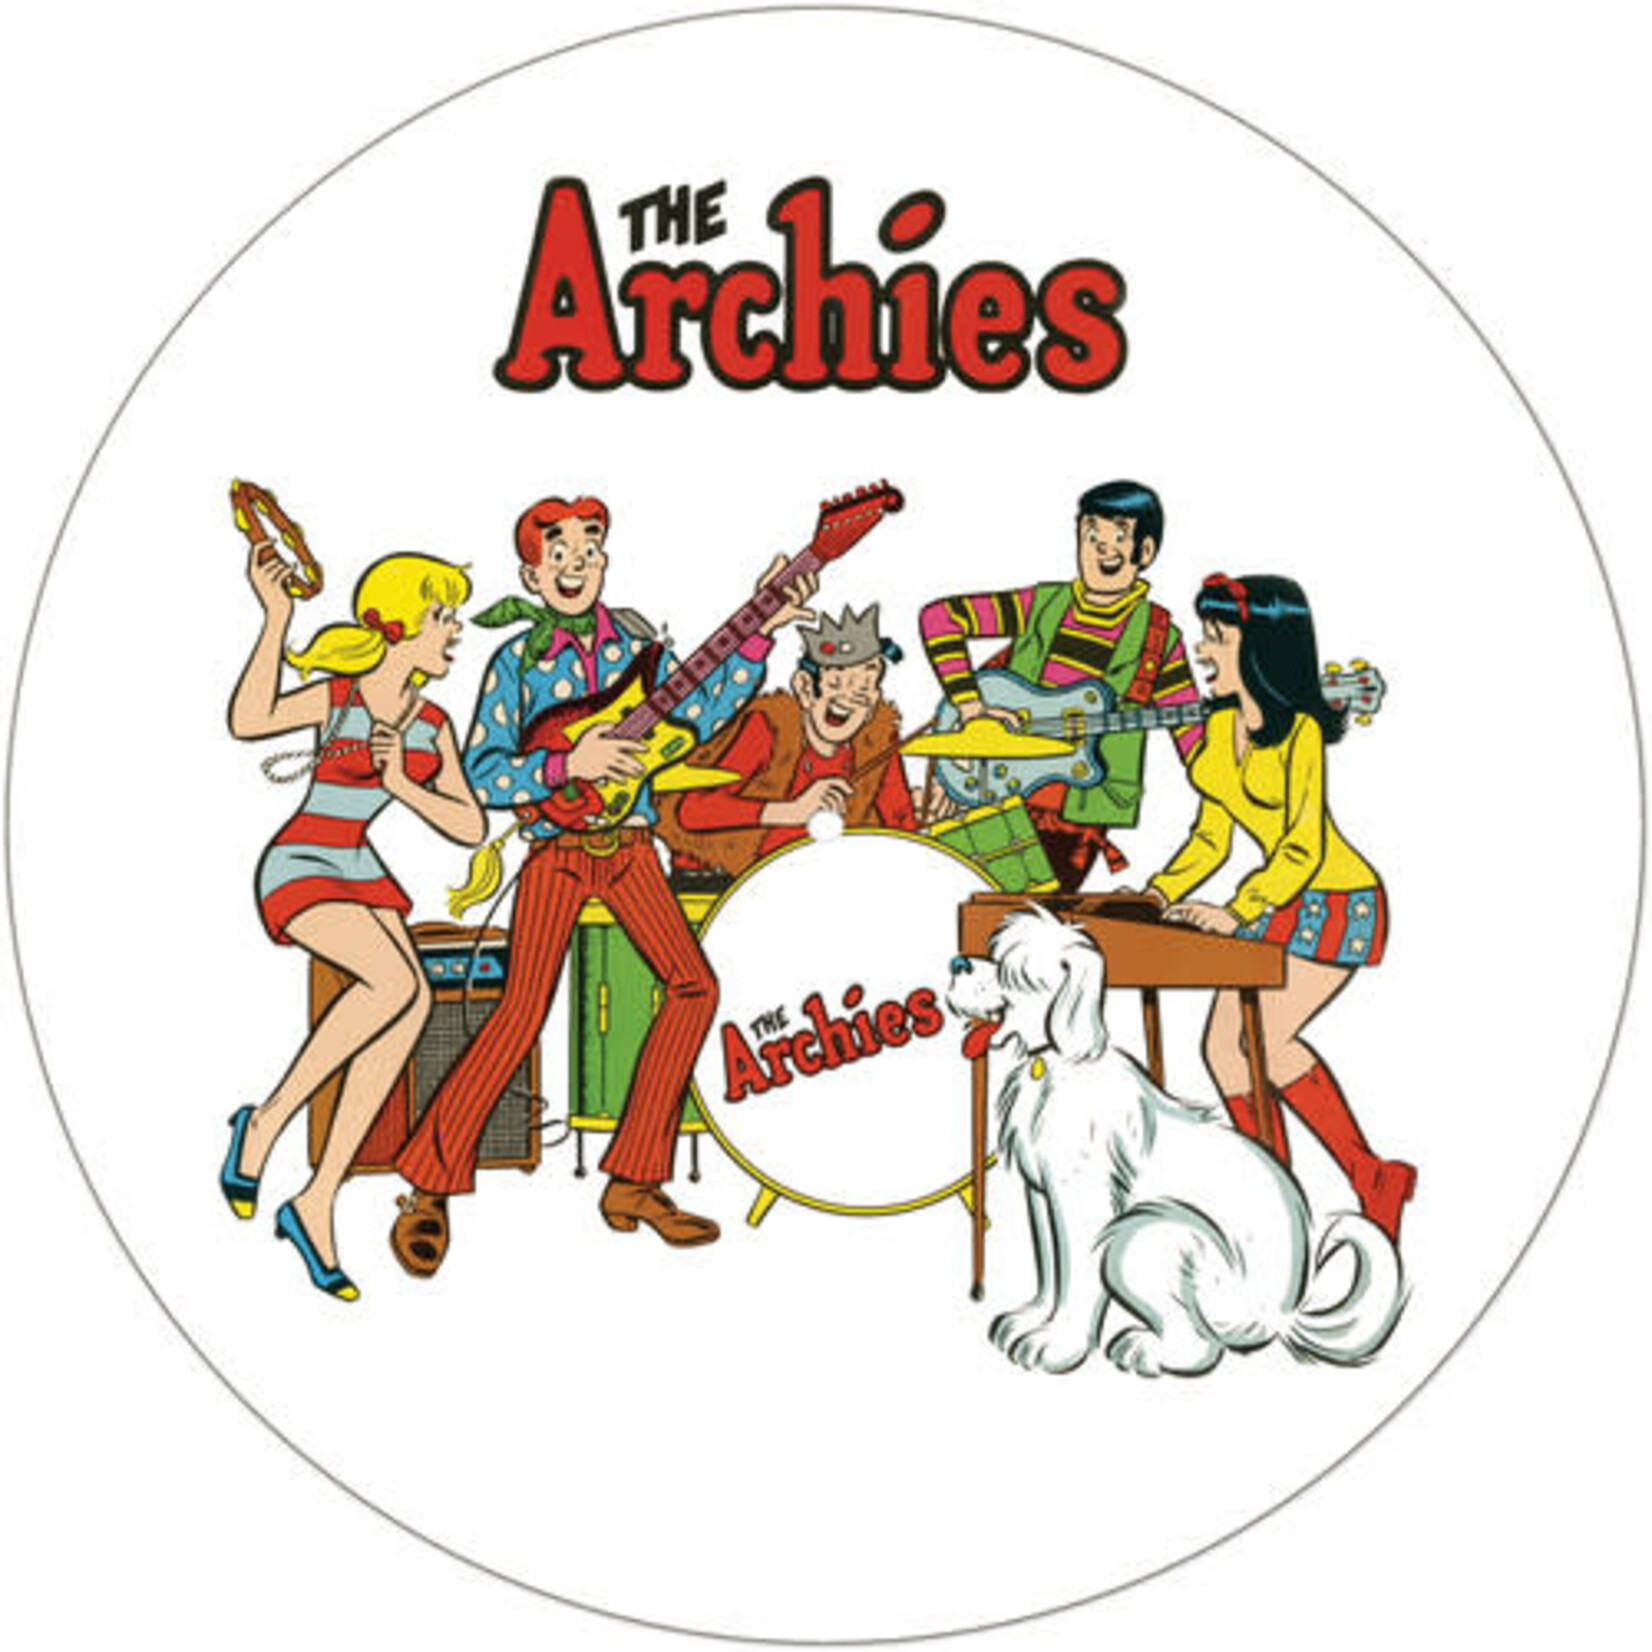 [New] Archies: The Archies (picture disc) [CLEOPATRA]